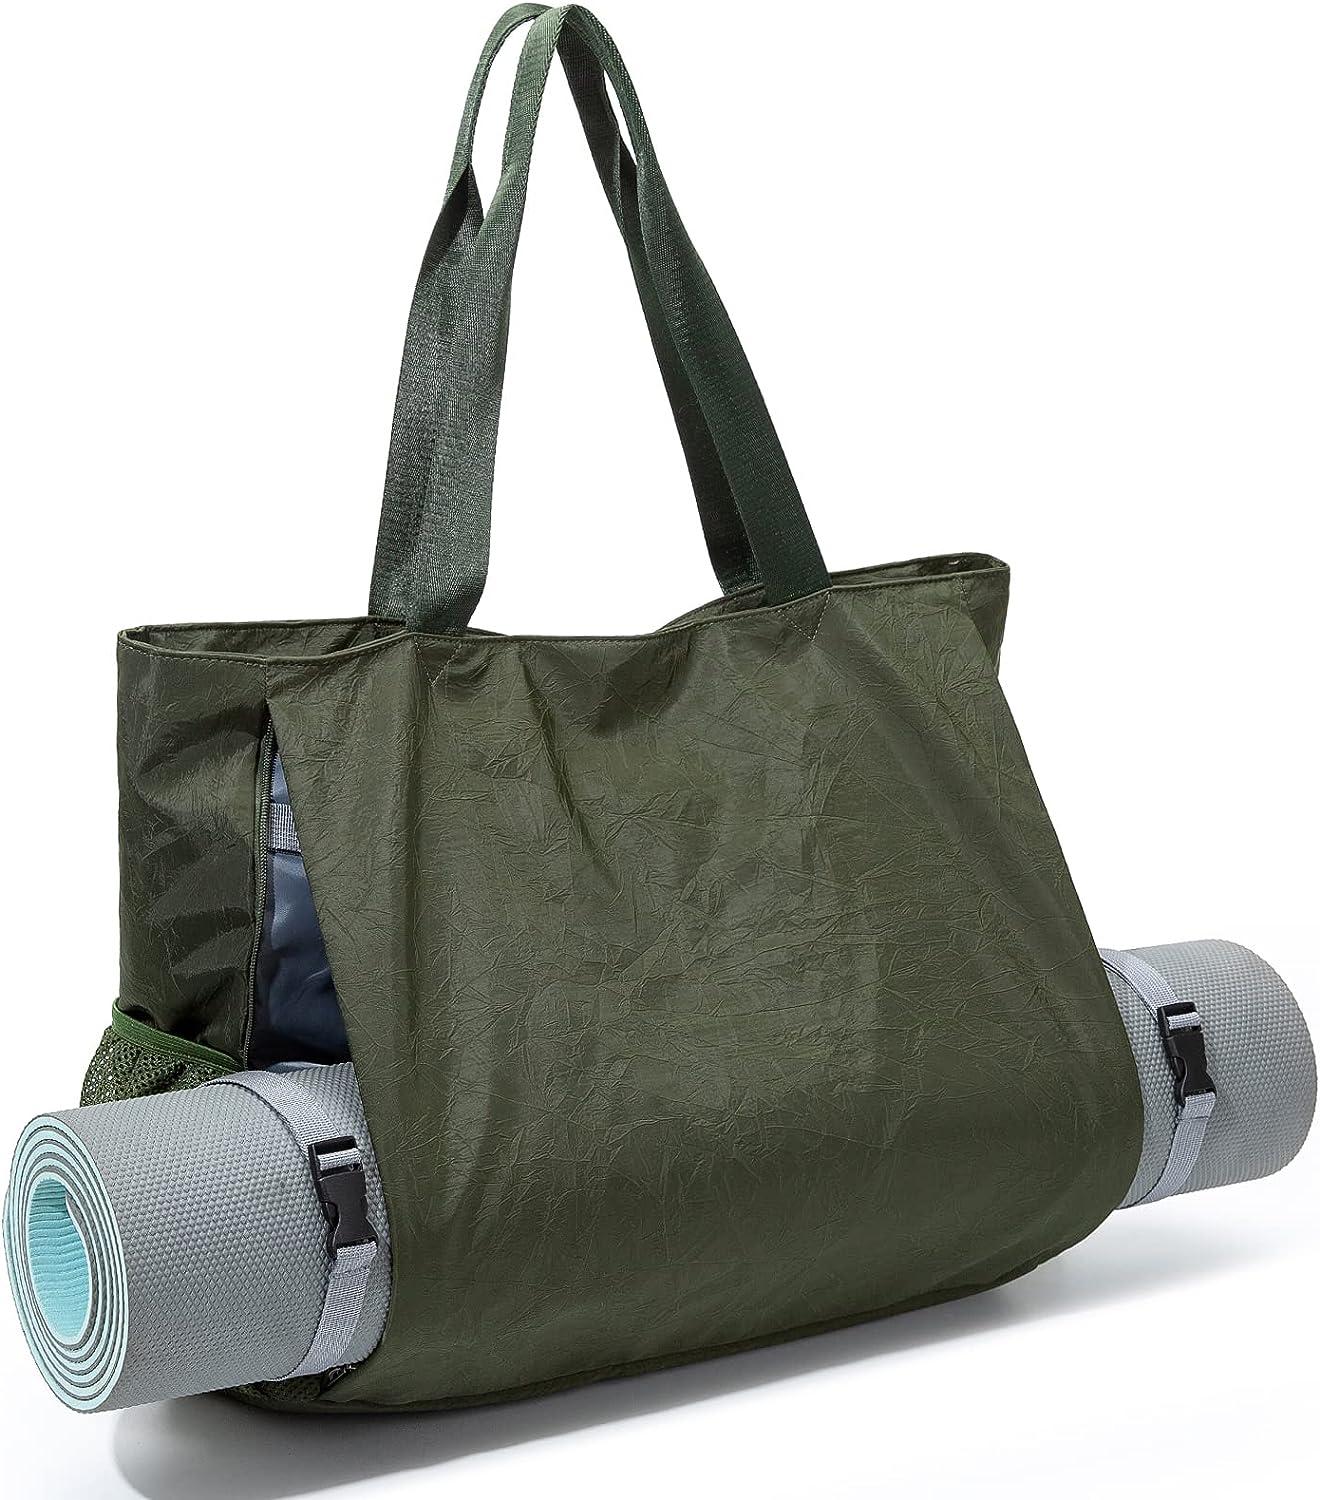 BOCMOEO Yoga Mat Bag, Yoga Tote Bags and Carriers for Women